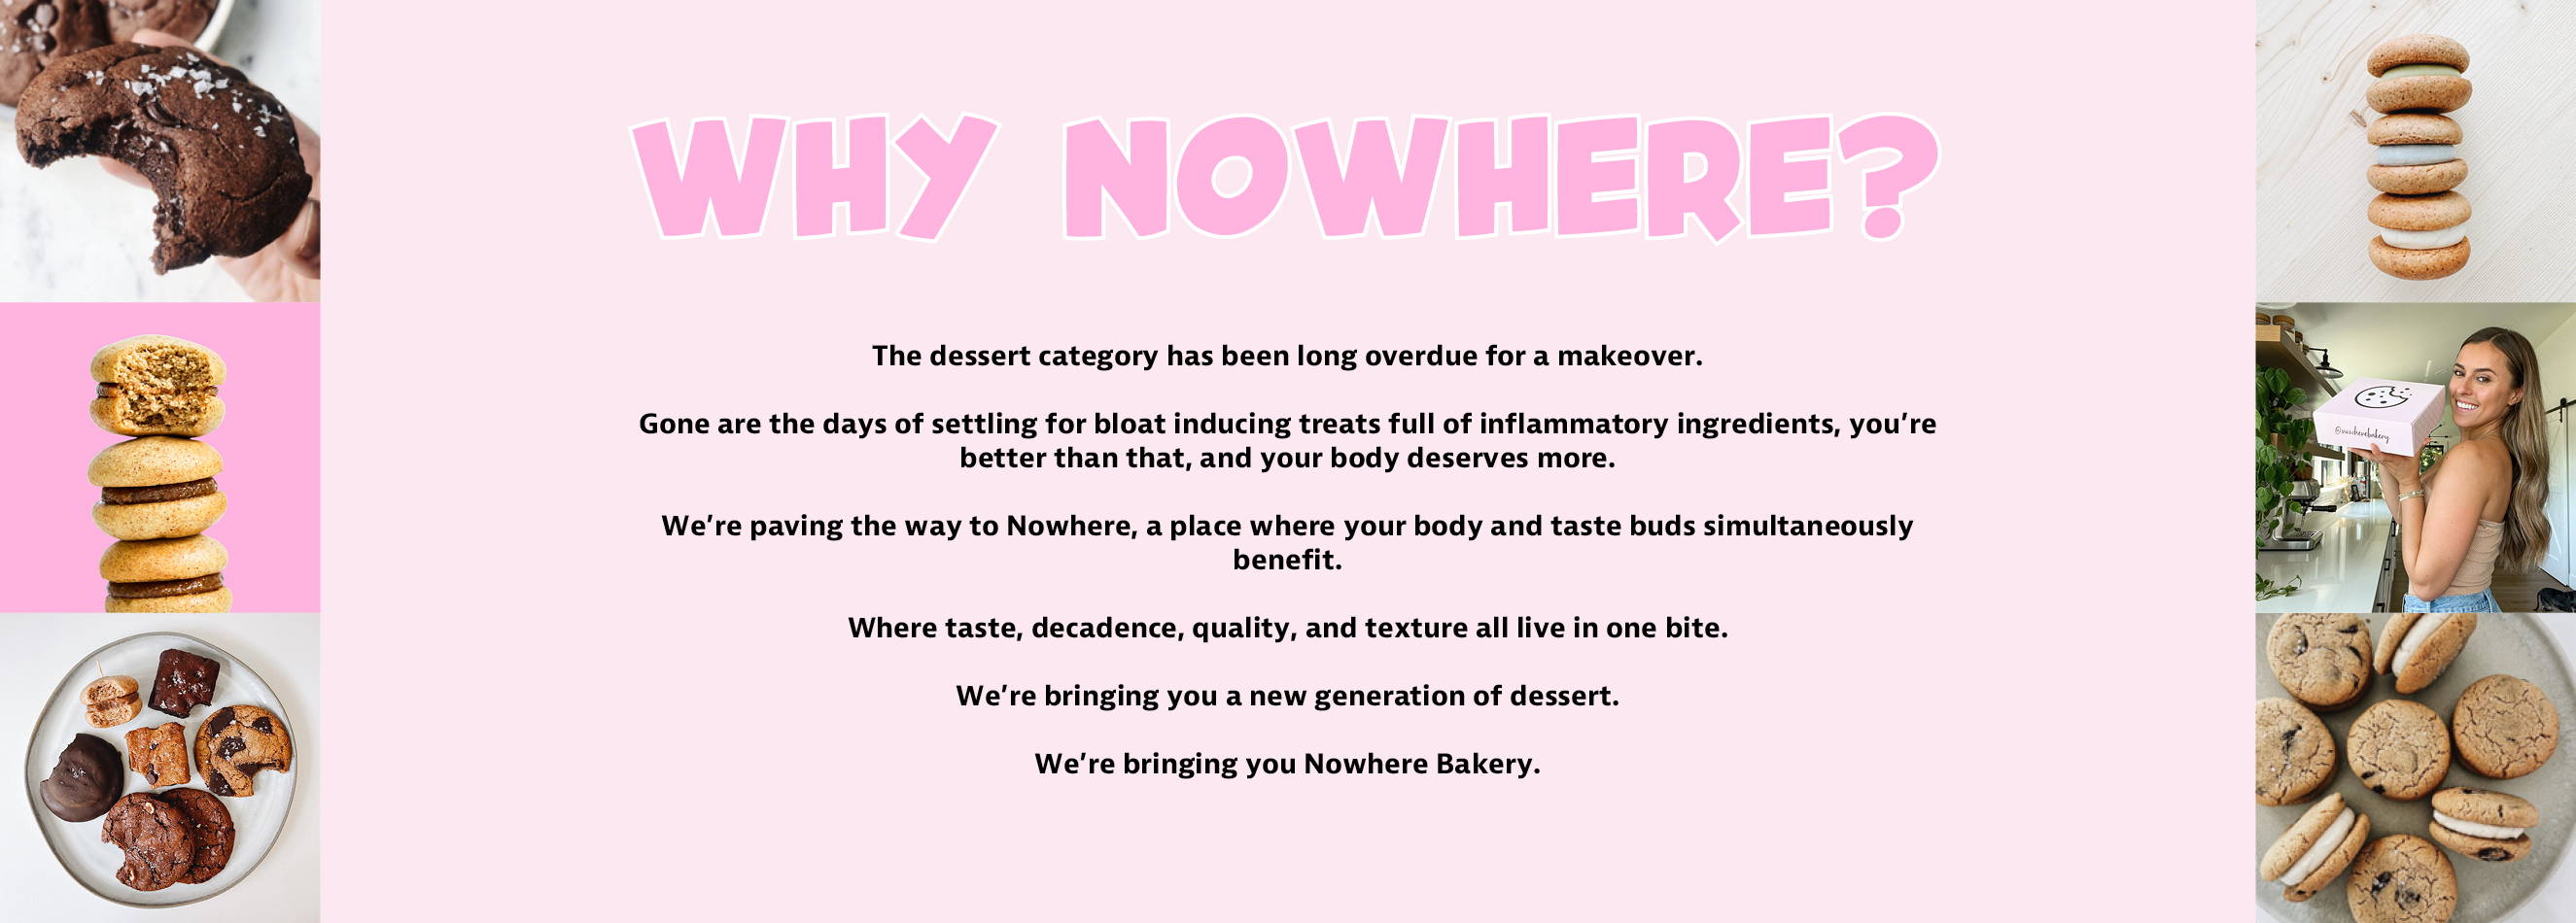 Why Nowhere Bakery?  The dessert category has been long overdue for a makeover.  Gone are the days of settling for bloat inducing treats full of inflammatory ingredients.  You're better than that and your body deserves more.  We're paving the way to Nowhere, a place where your body and taste buds simultaneously benefit.  Where taste, decadence, quality and texture all live in one bite.  We're bringing you a new generation of dessert. We're bringing you Nowhere Bakery.    